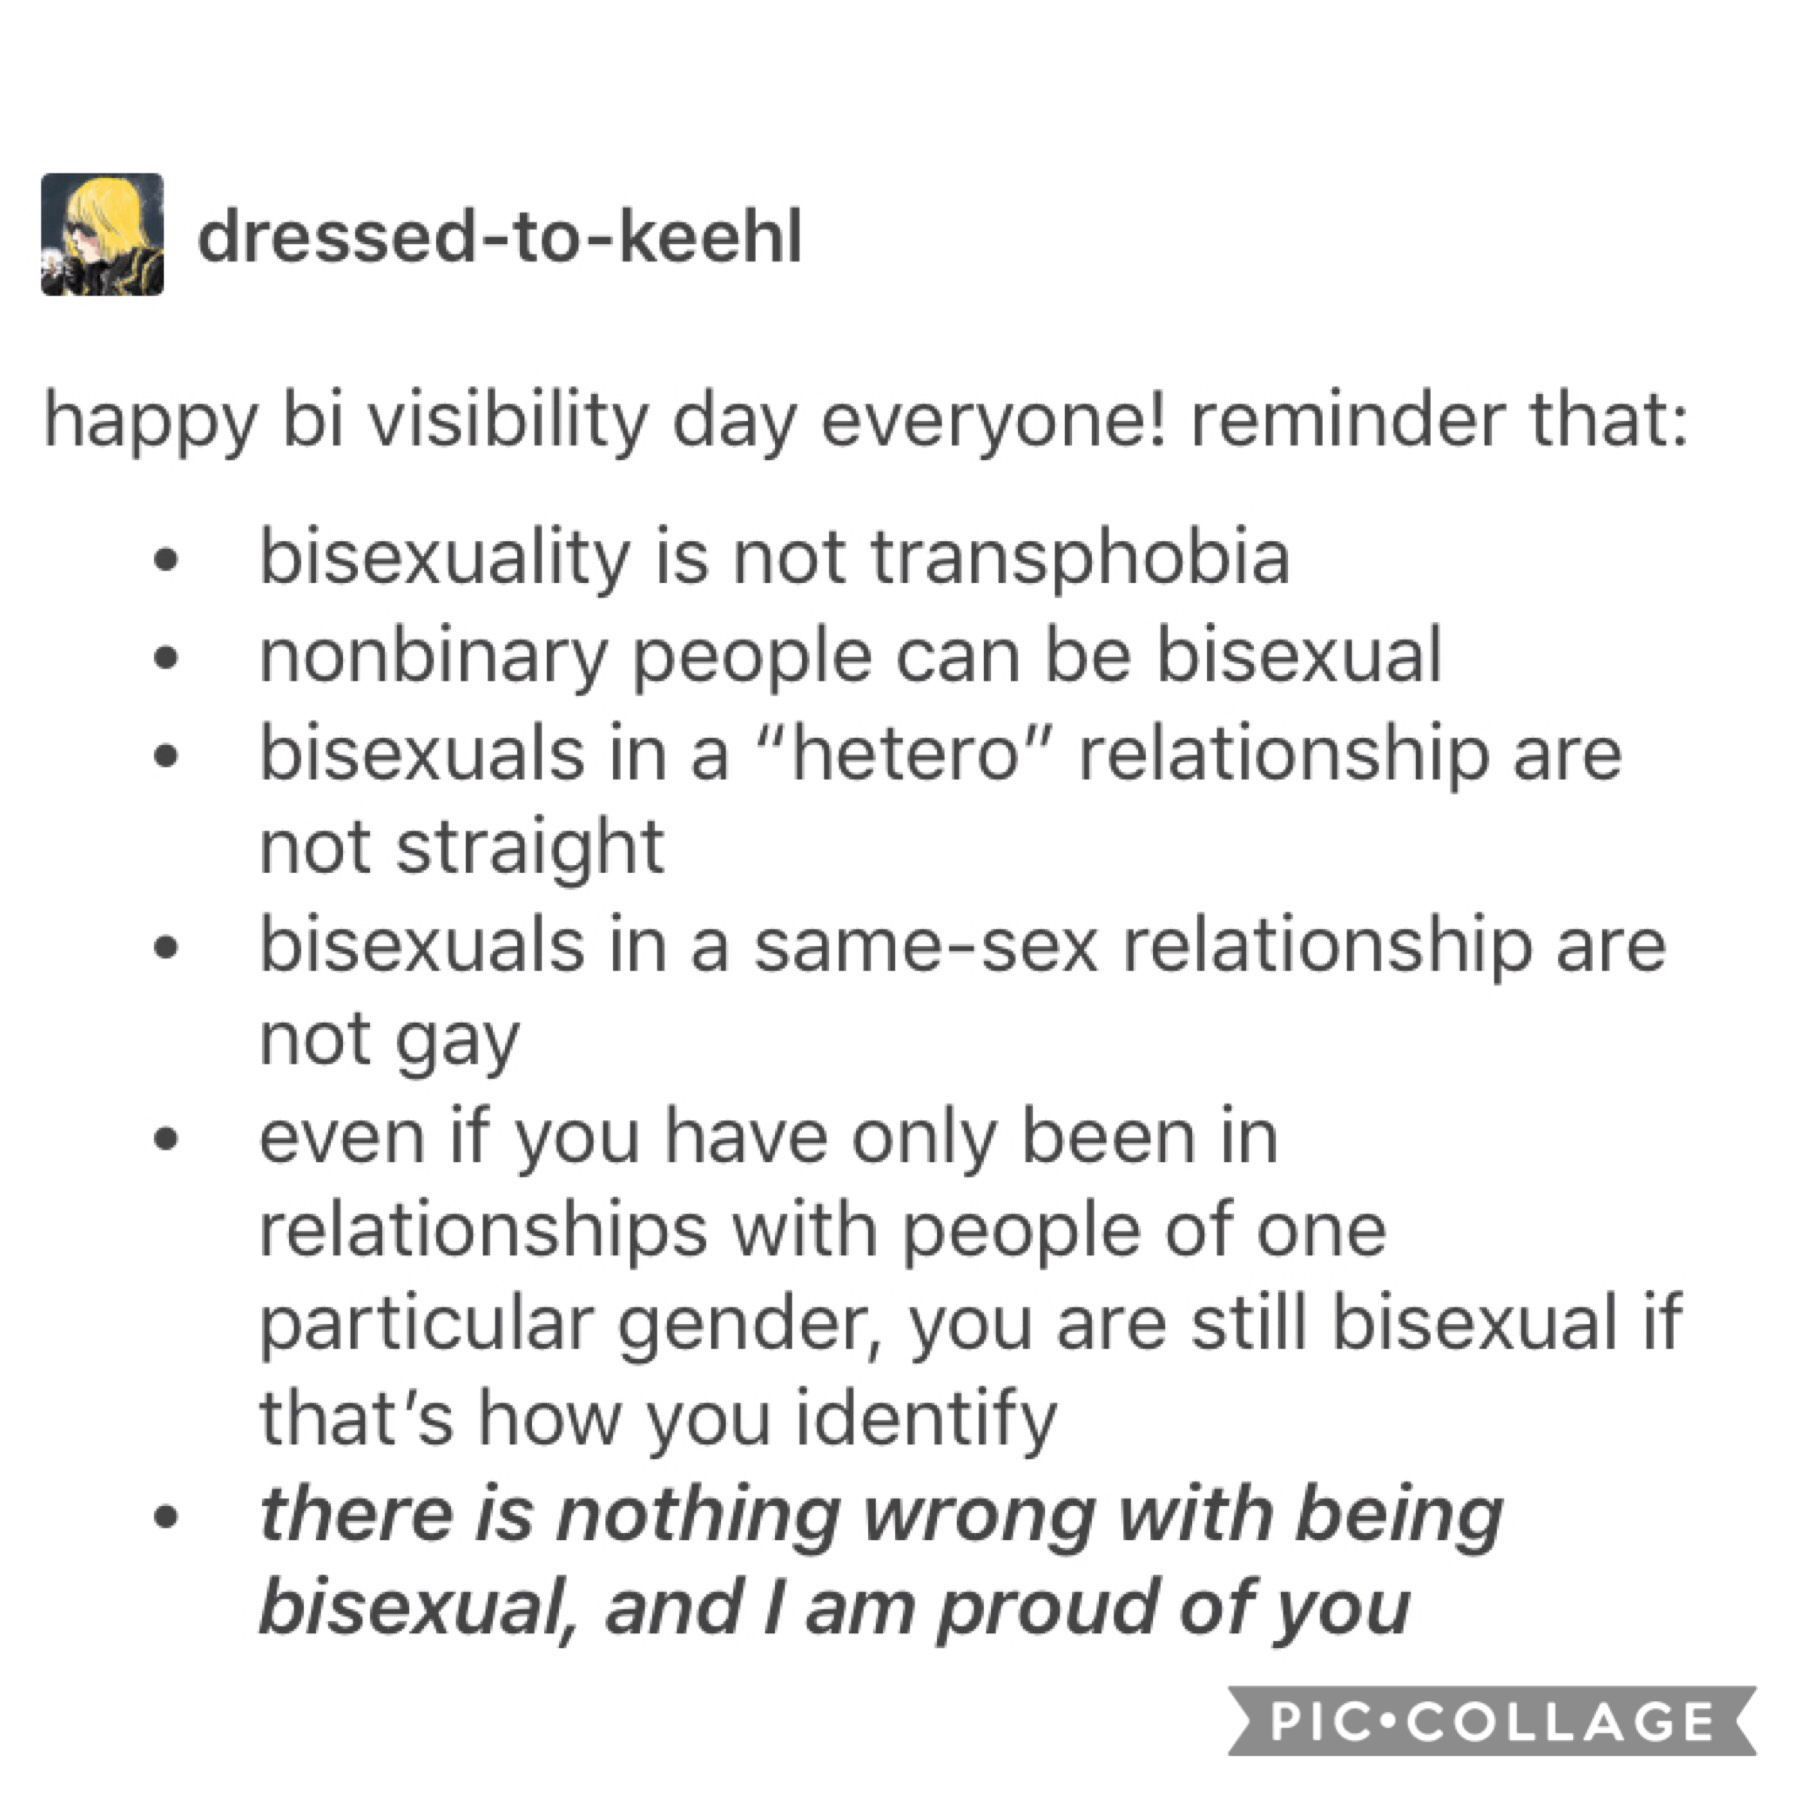 Happy bi visibility day!!! I love y’all so much you deserve the fūckin world. Hmu if there’s ever any biphobic dįckheads being āsses to you, I’ll steal their bones